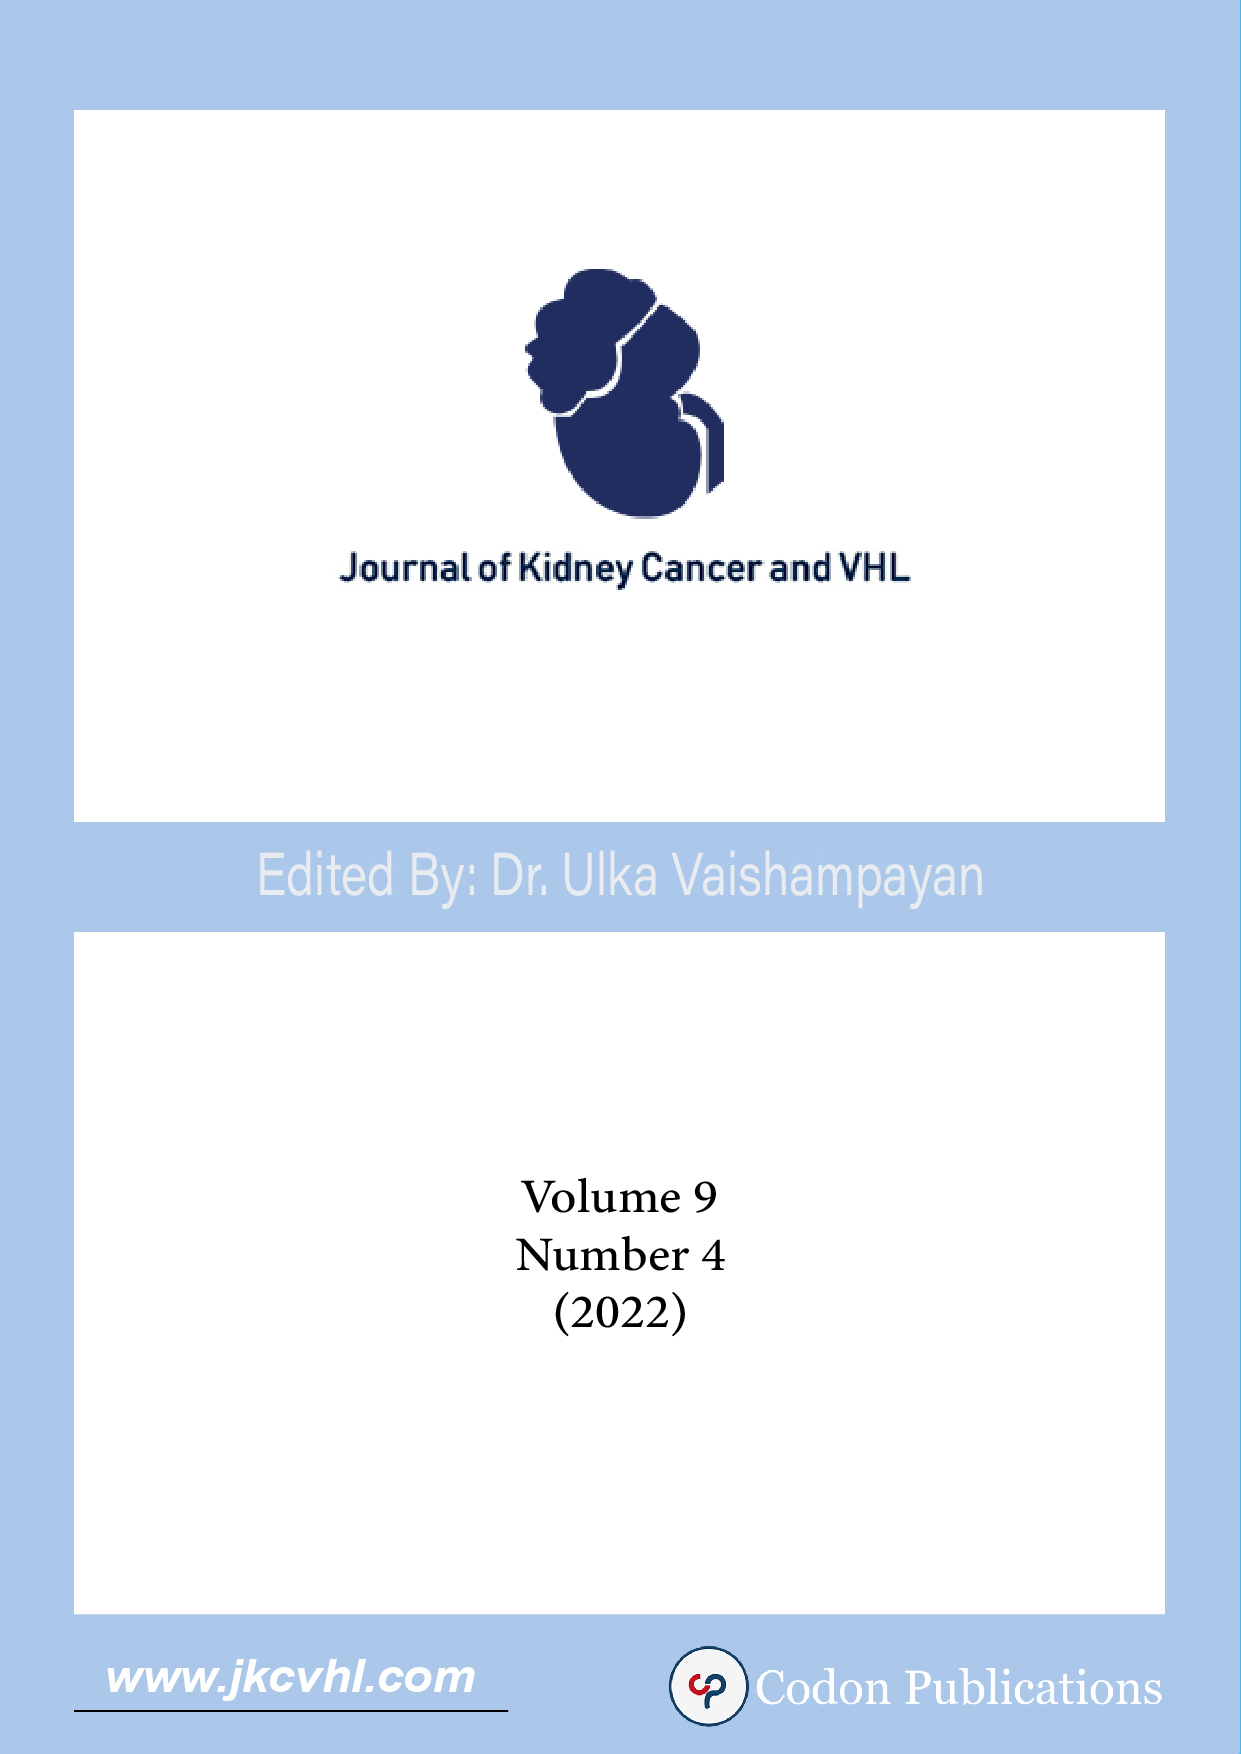 					View Vol. 9 No. 4 (2022): Journal of Kidney Cancer and VHL
				